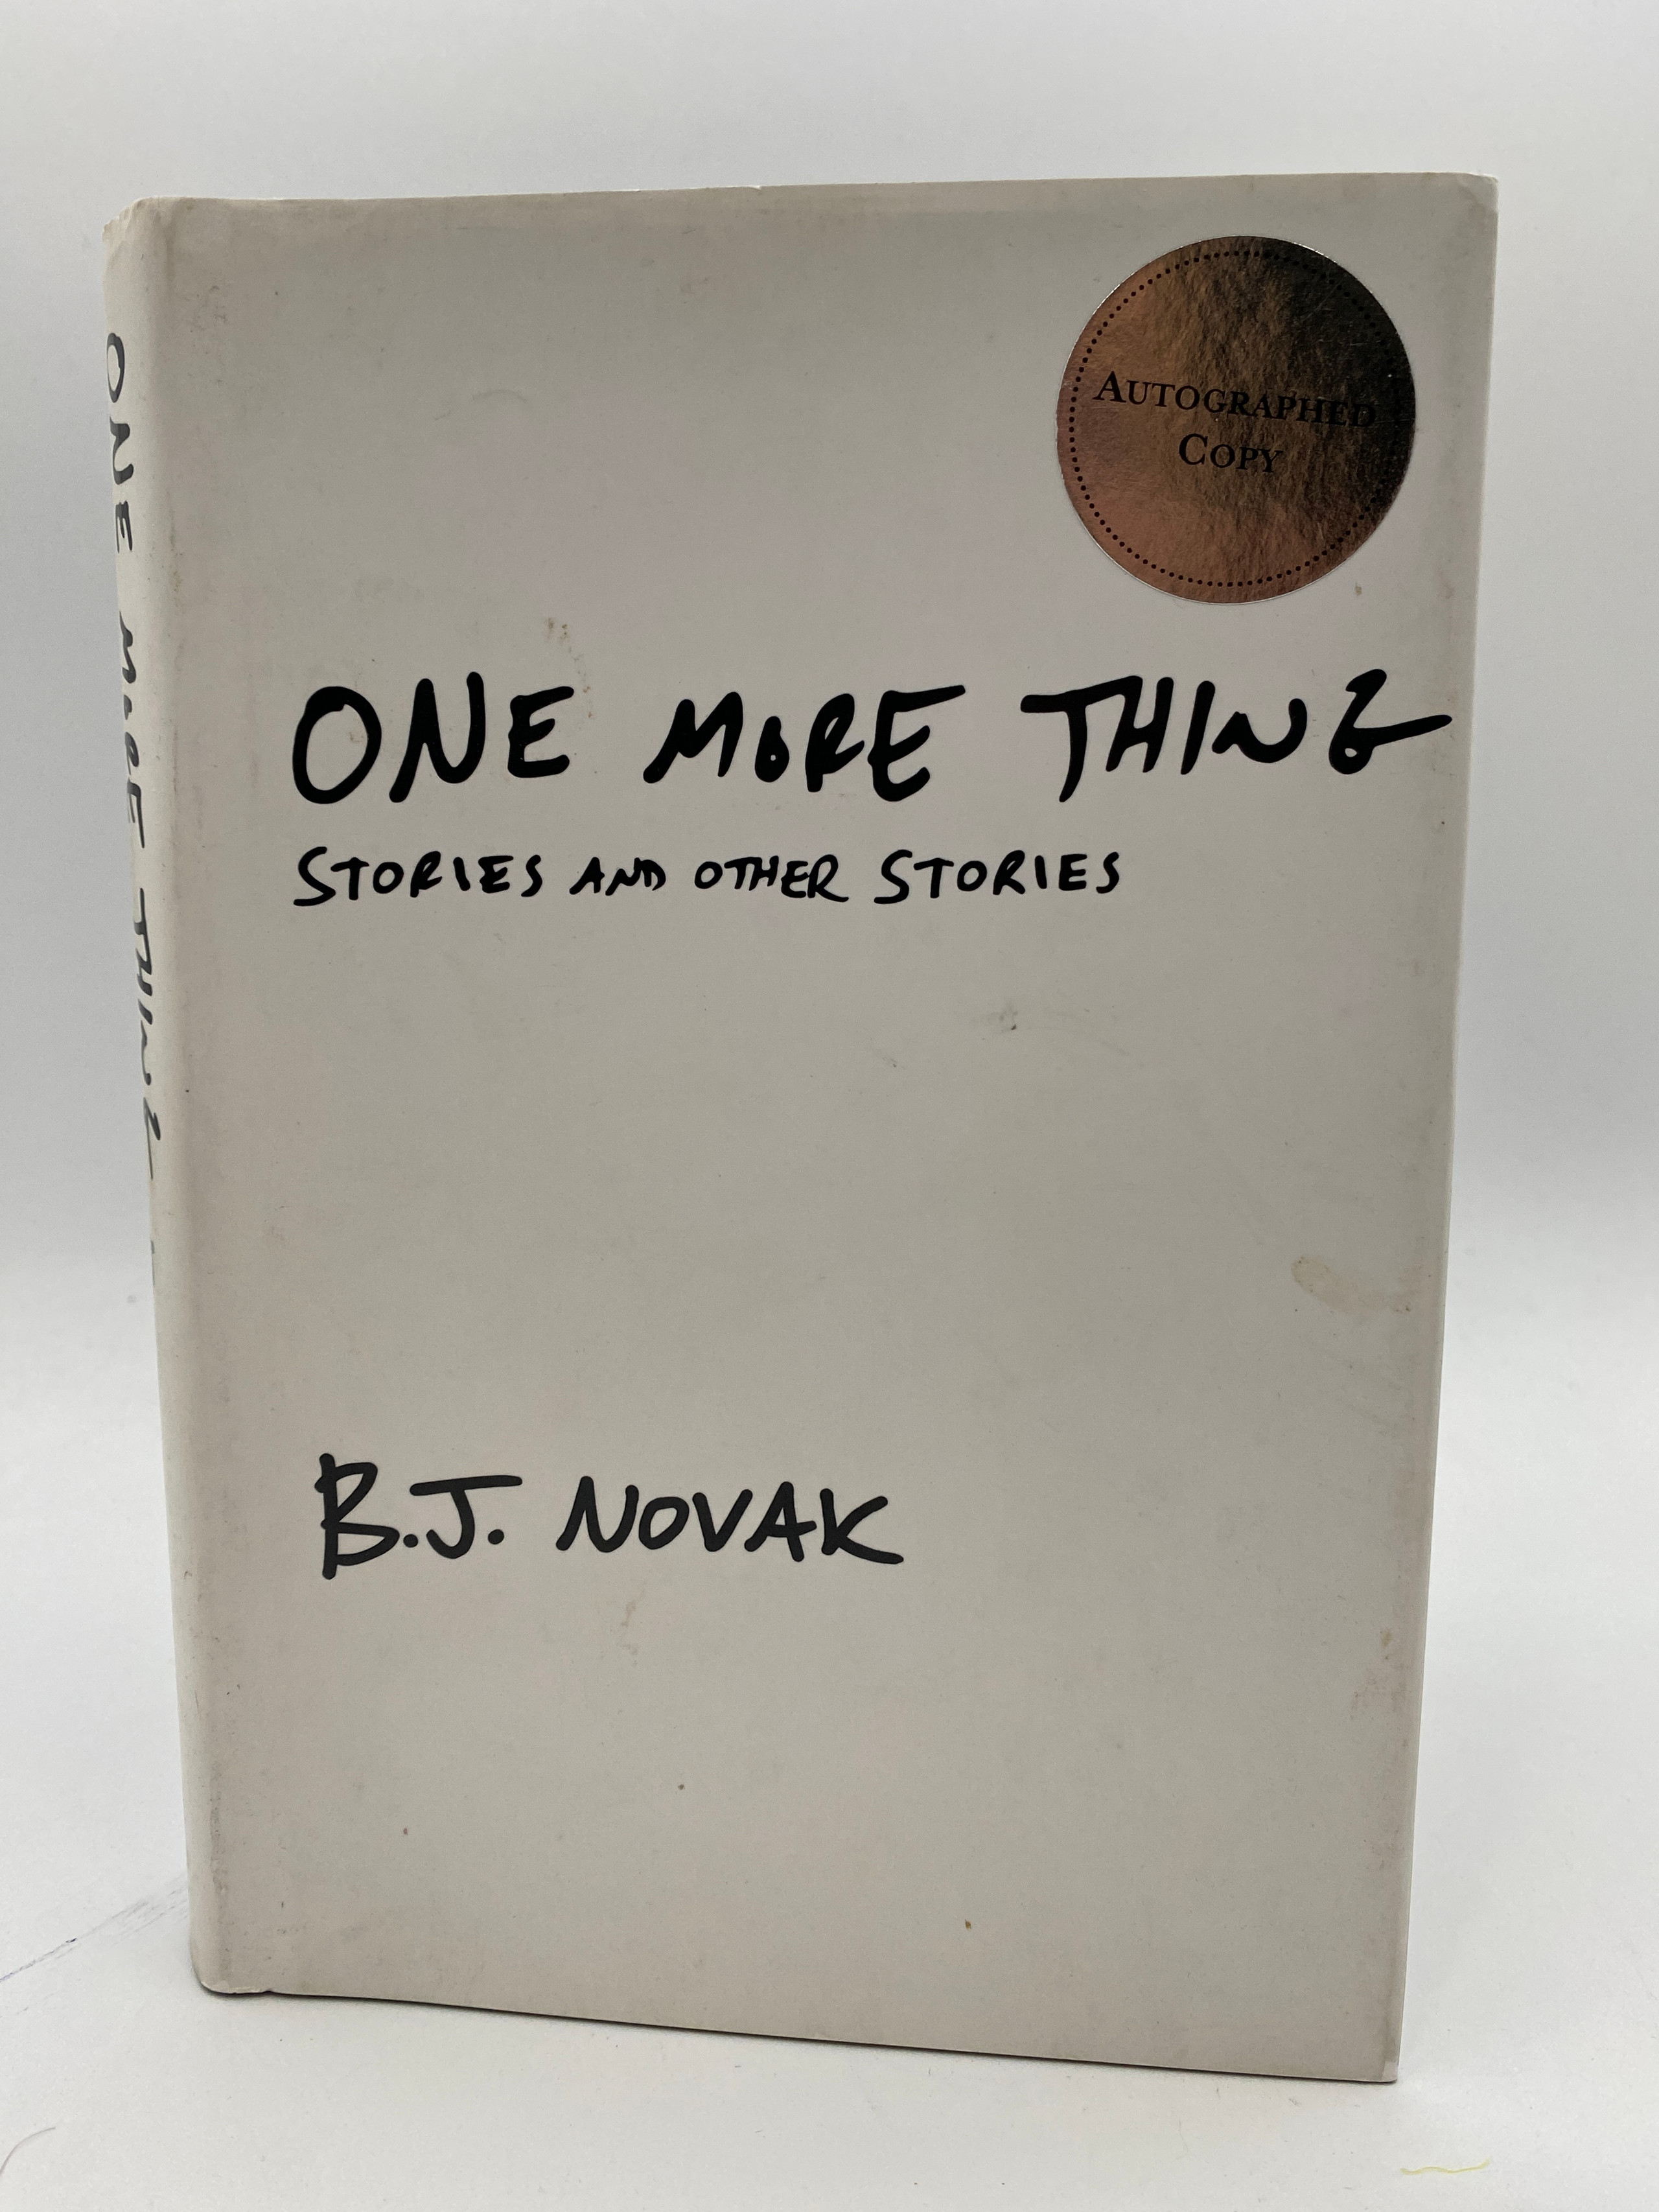 One More Thing Autographed by B.J. Novak - PremiereCollectibles.com